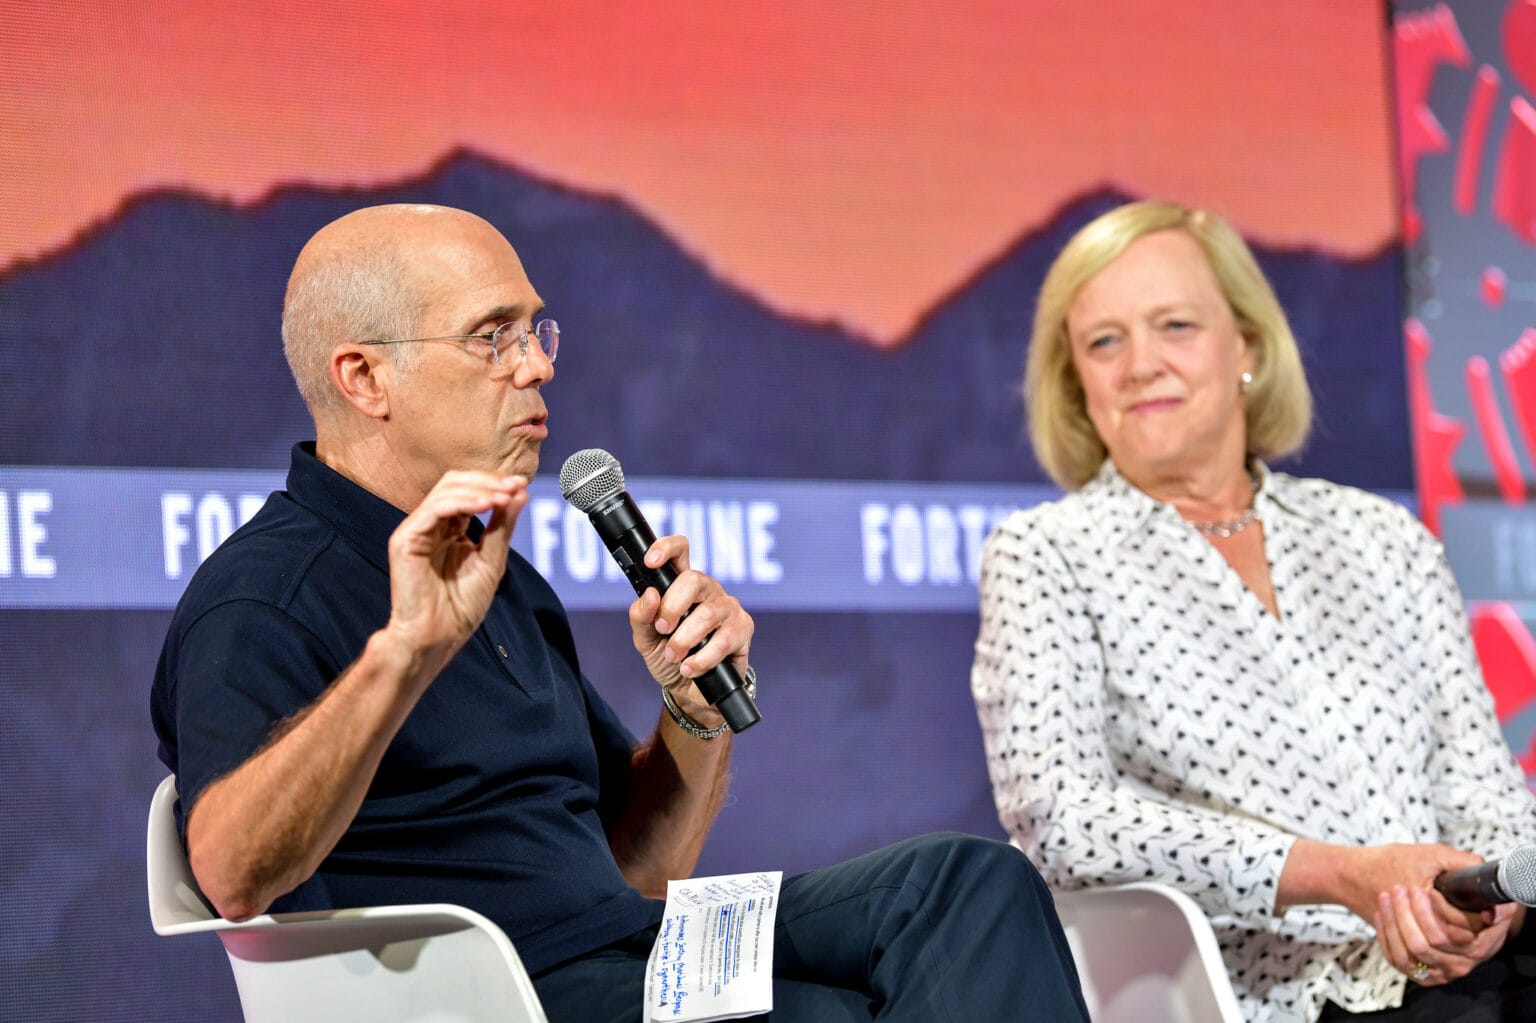 Power players Jeffrey Katzenberg and Meg Whitman apparently couldn't save Quibi.